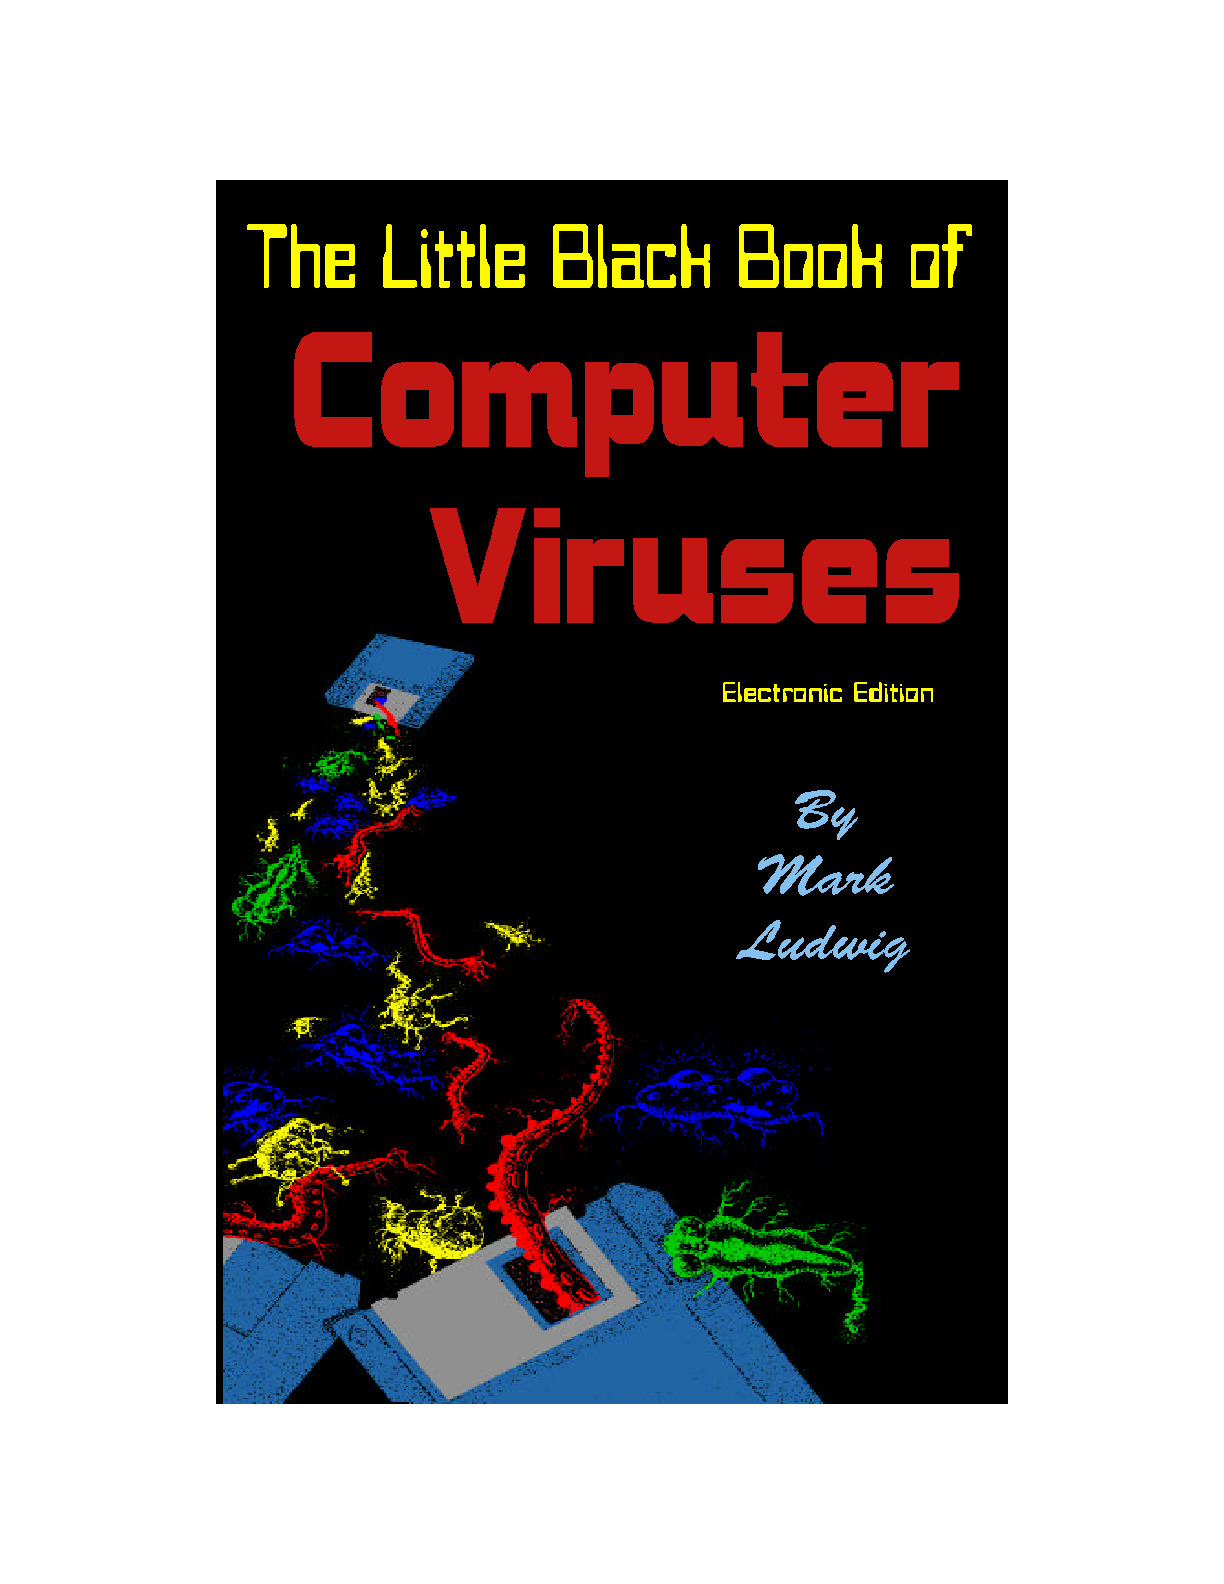 Black_Book_of_Viruses_and_Hacking